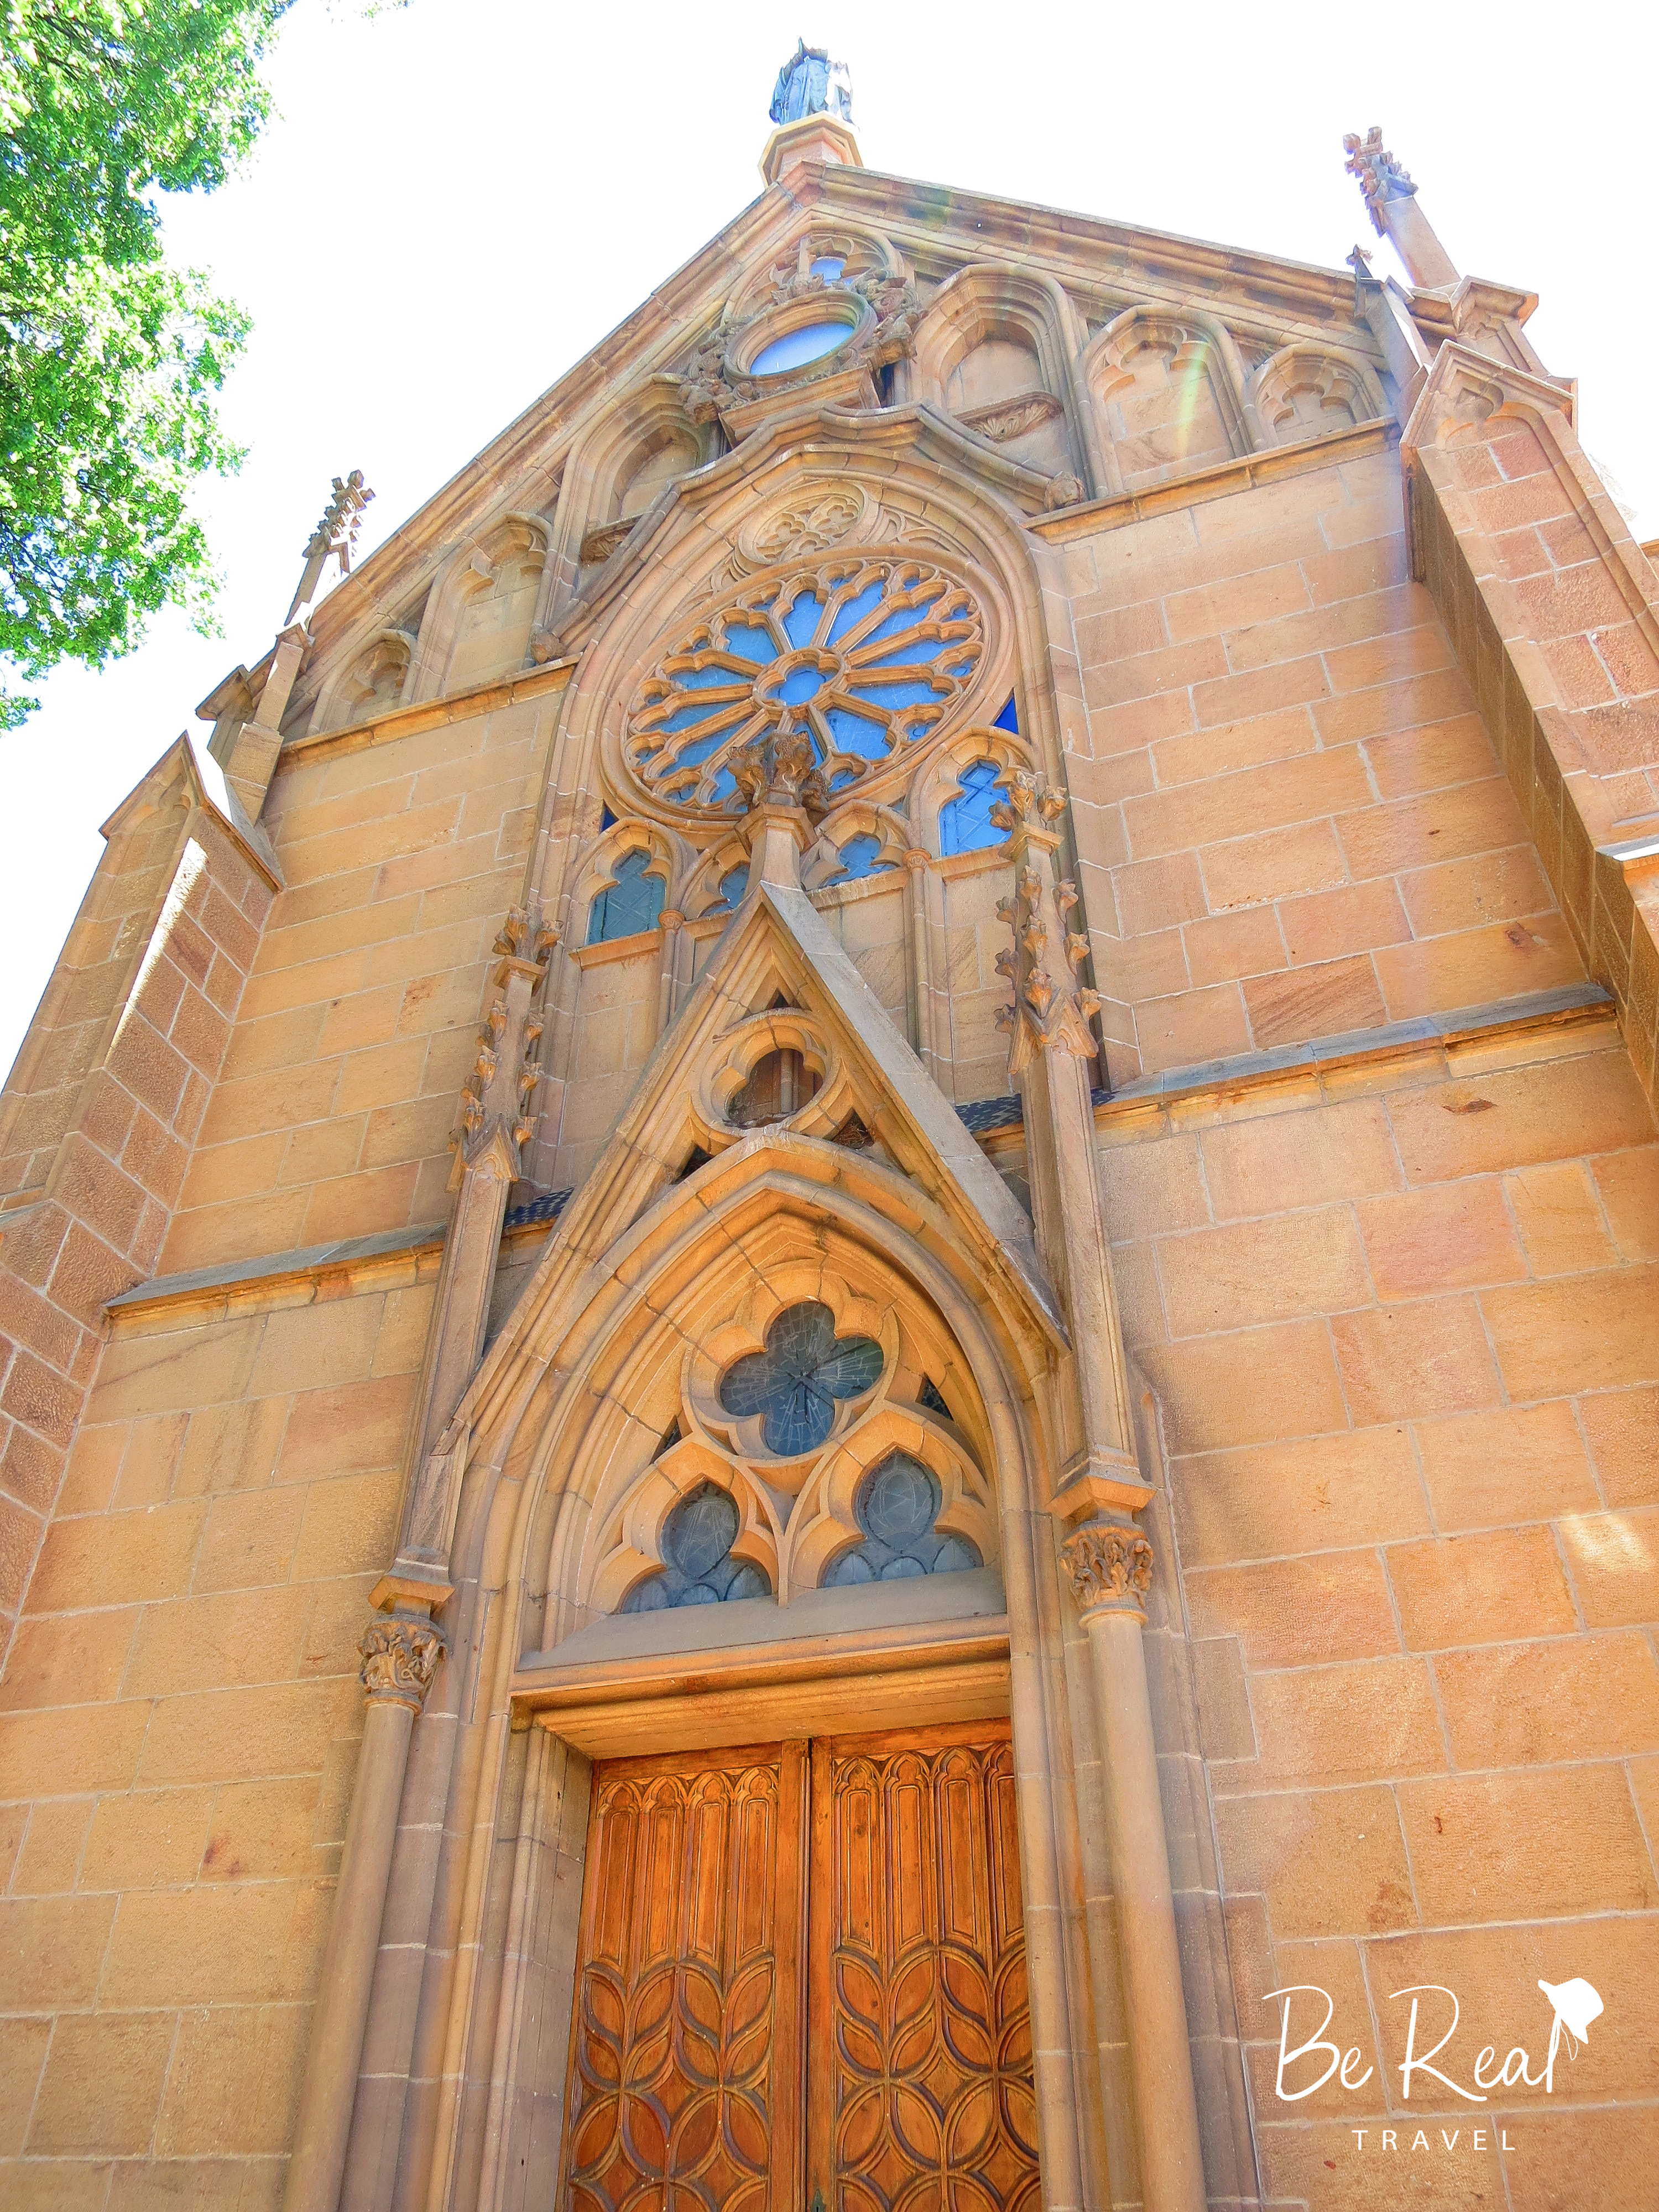 A church with intricately-designed windows towers over the viewer in Santa Fe, New Mexico